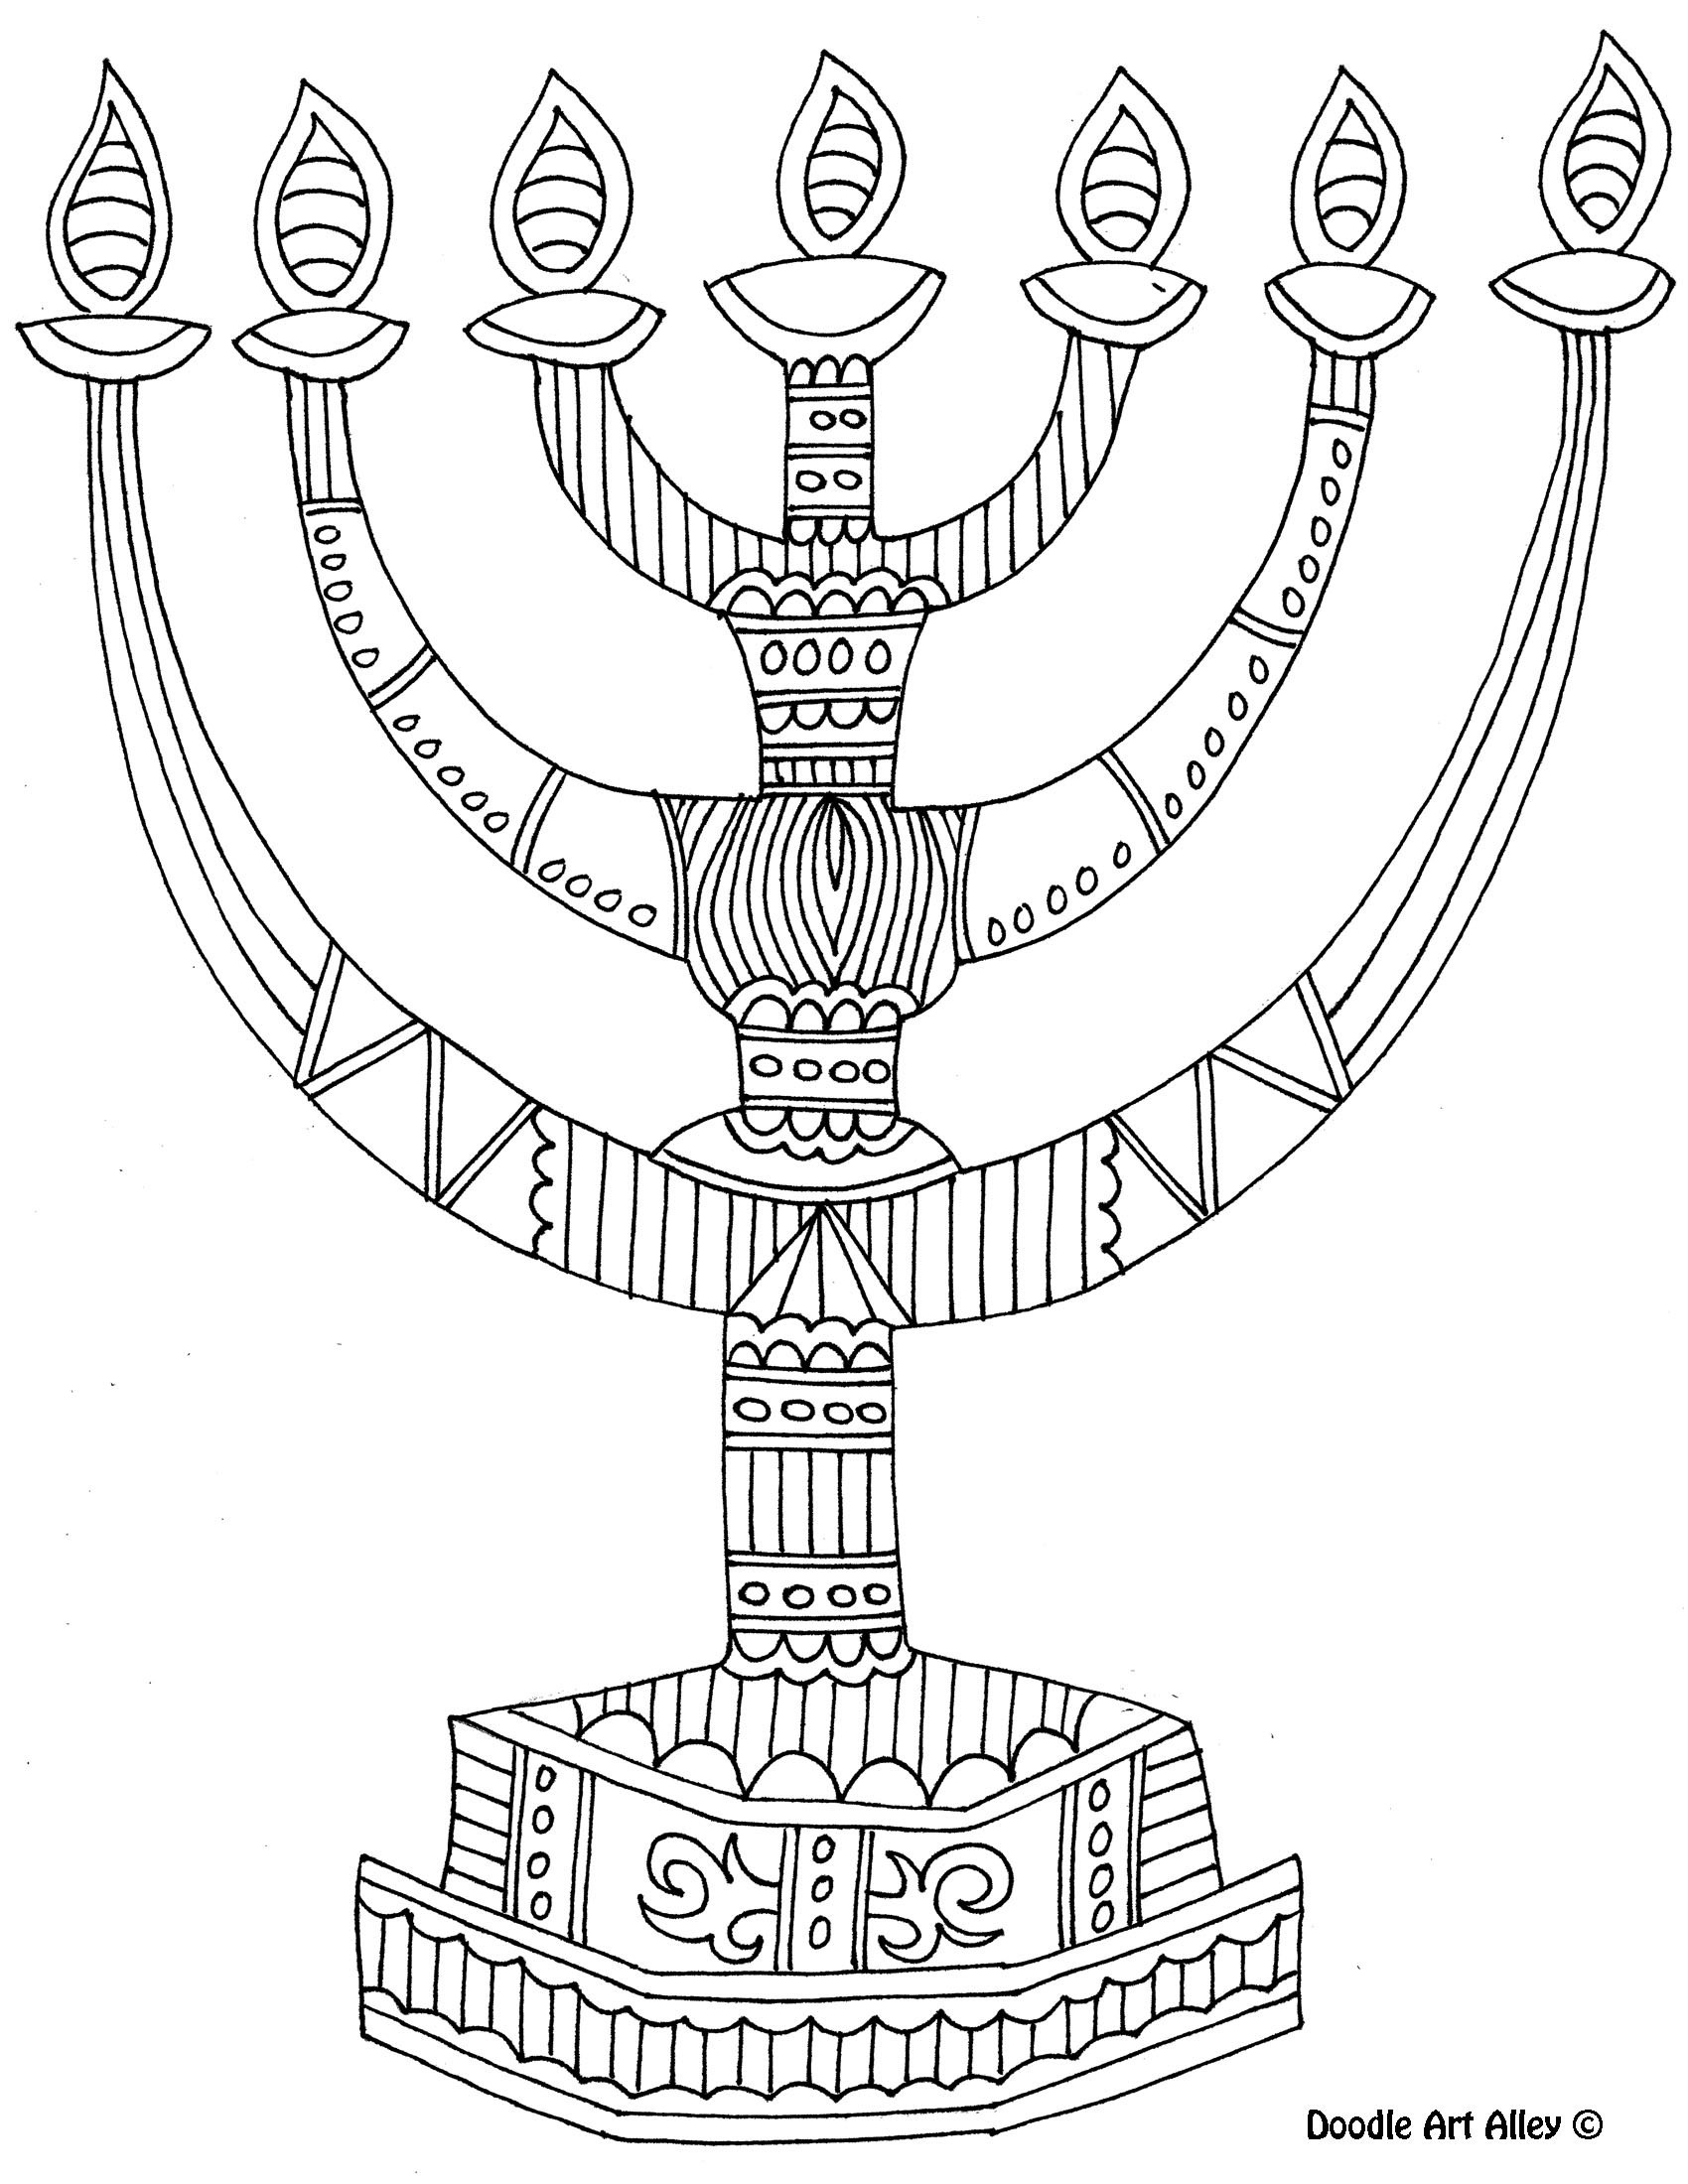 Hanukkah Coloring Pages Free Printables
 8 of the best most artful Hanukkah coloring pages